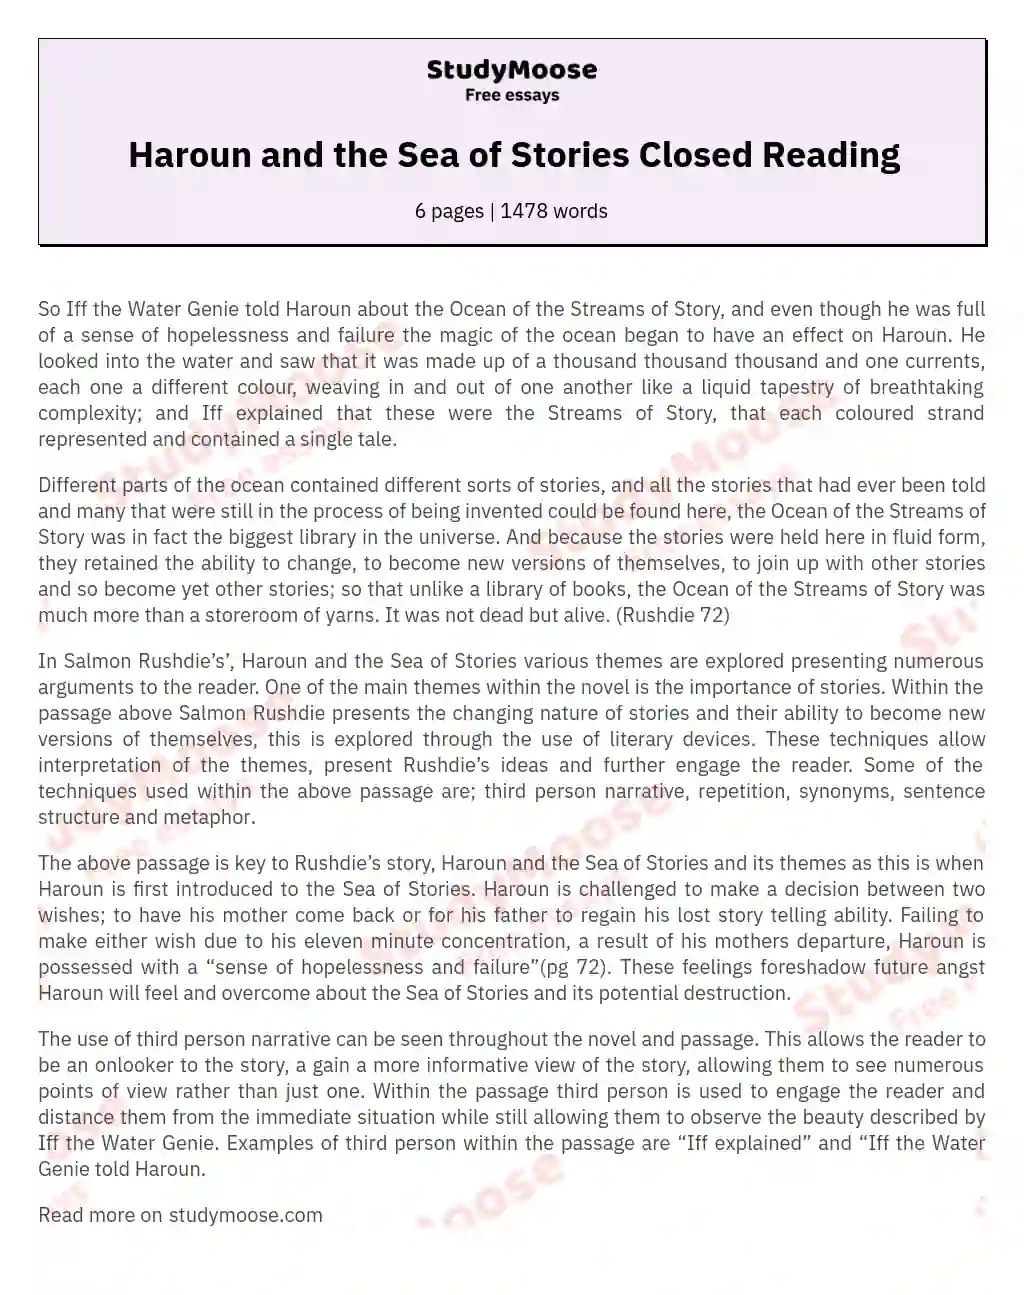 Haroun and the Sea of Stories Closed Reading